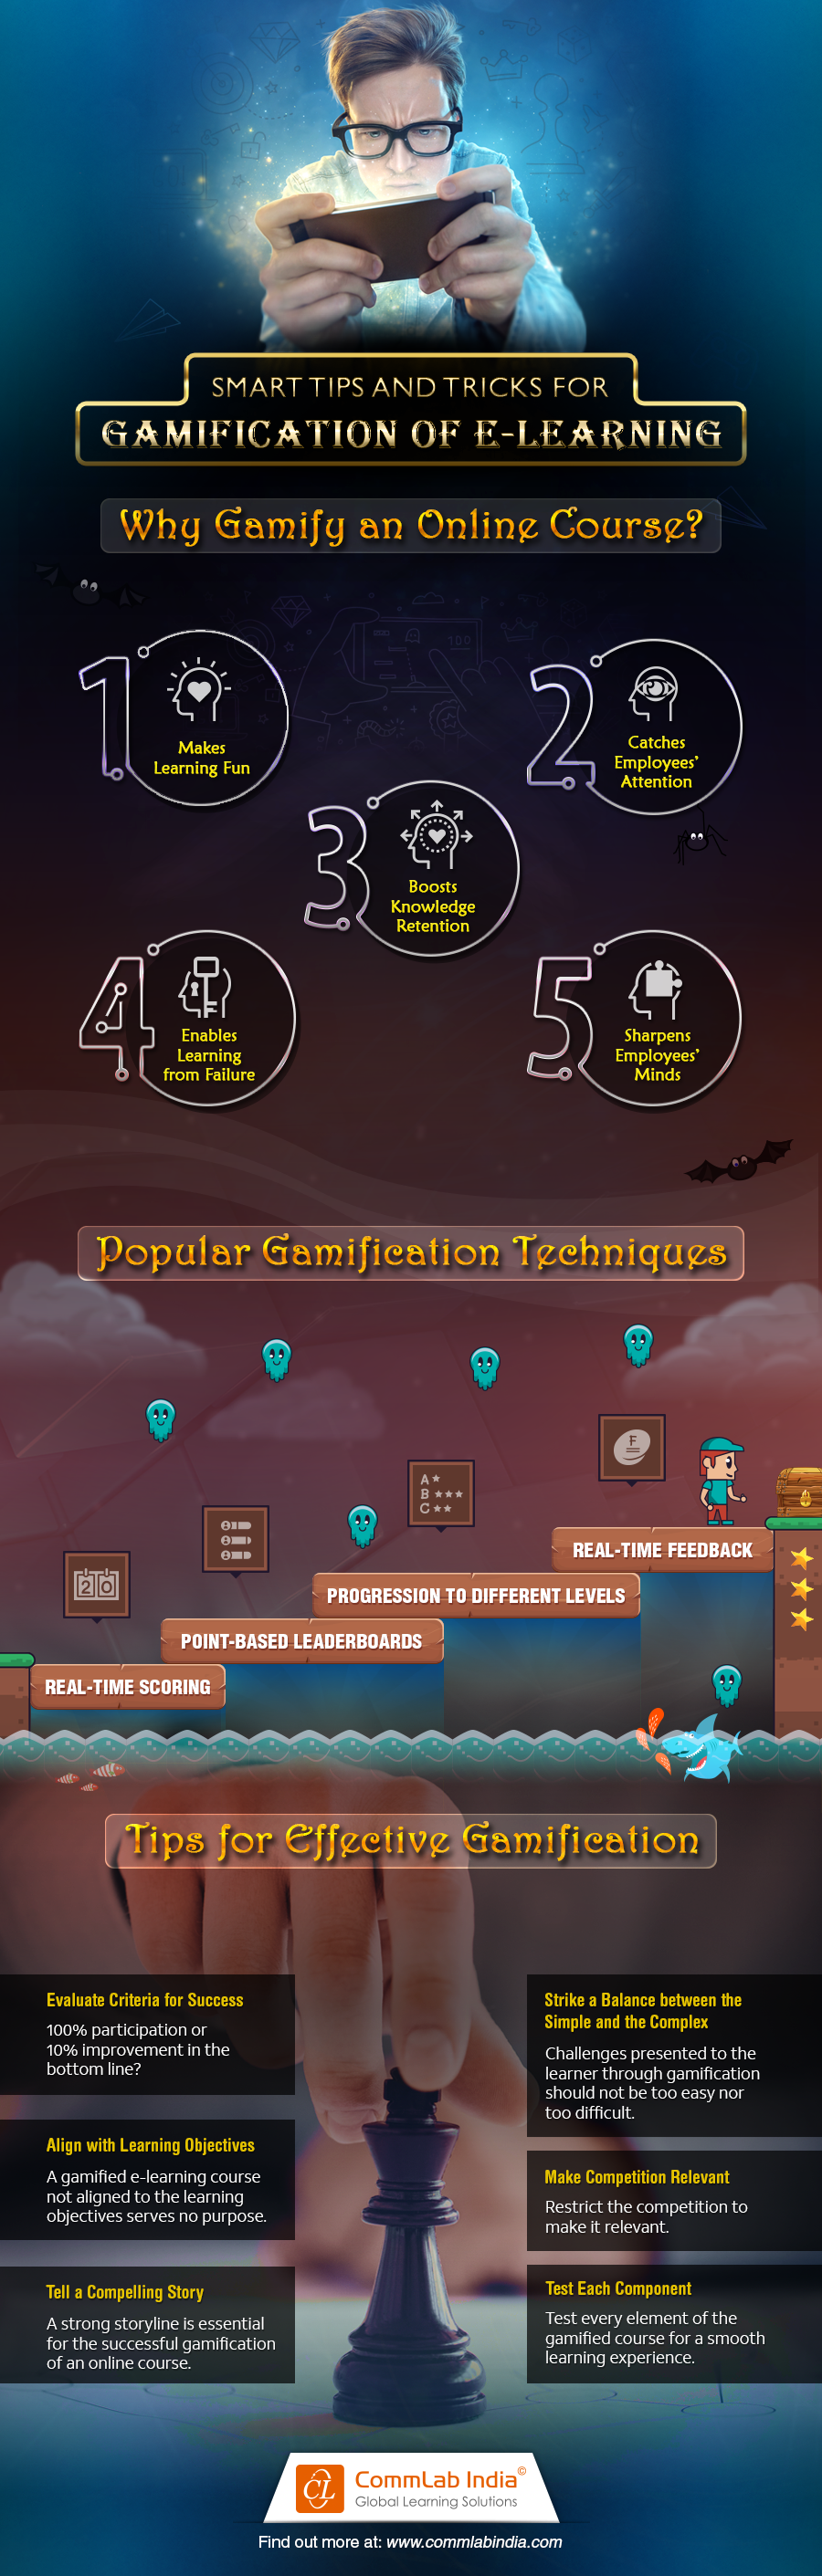 Smart Tips and Tricks for Gamification of E-learning